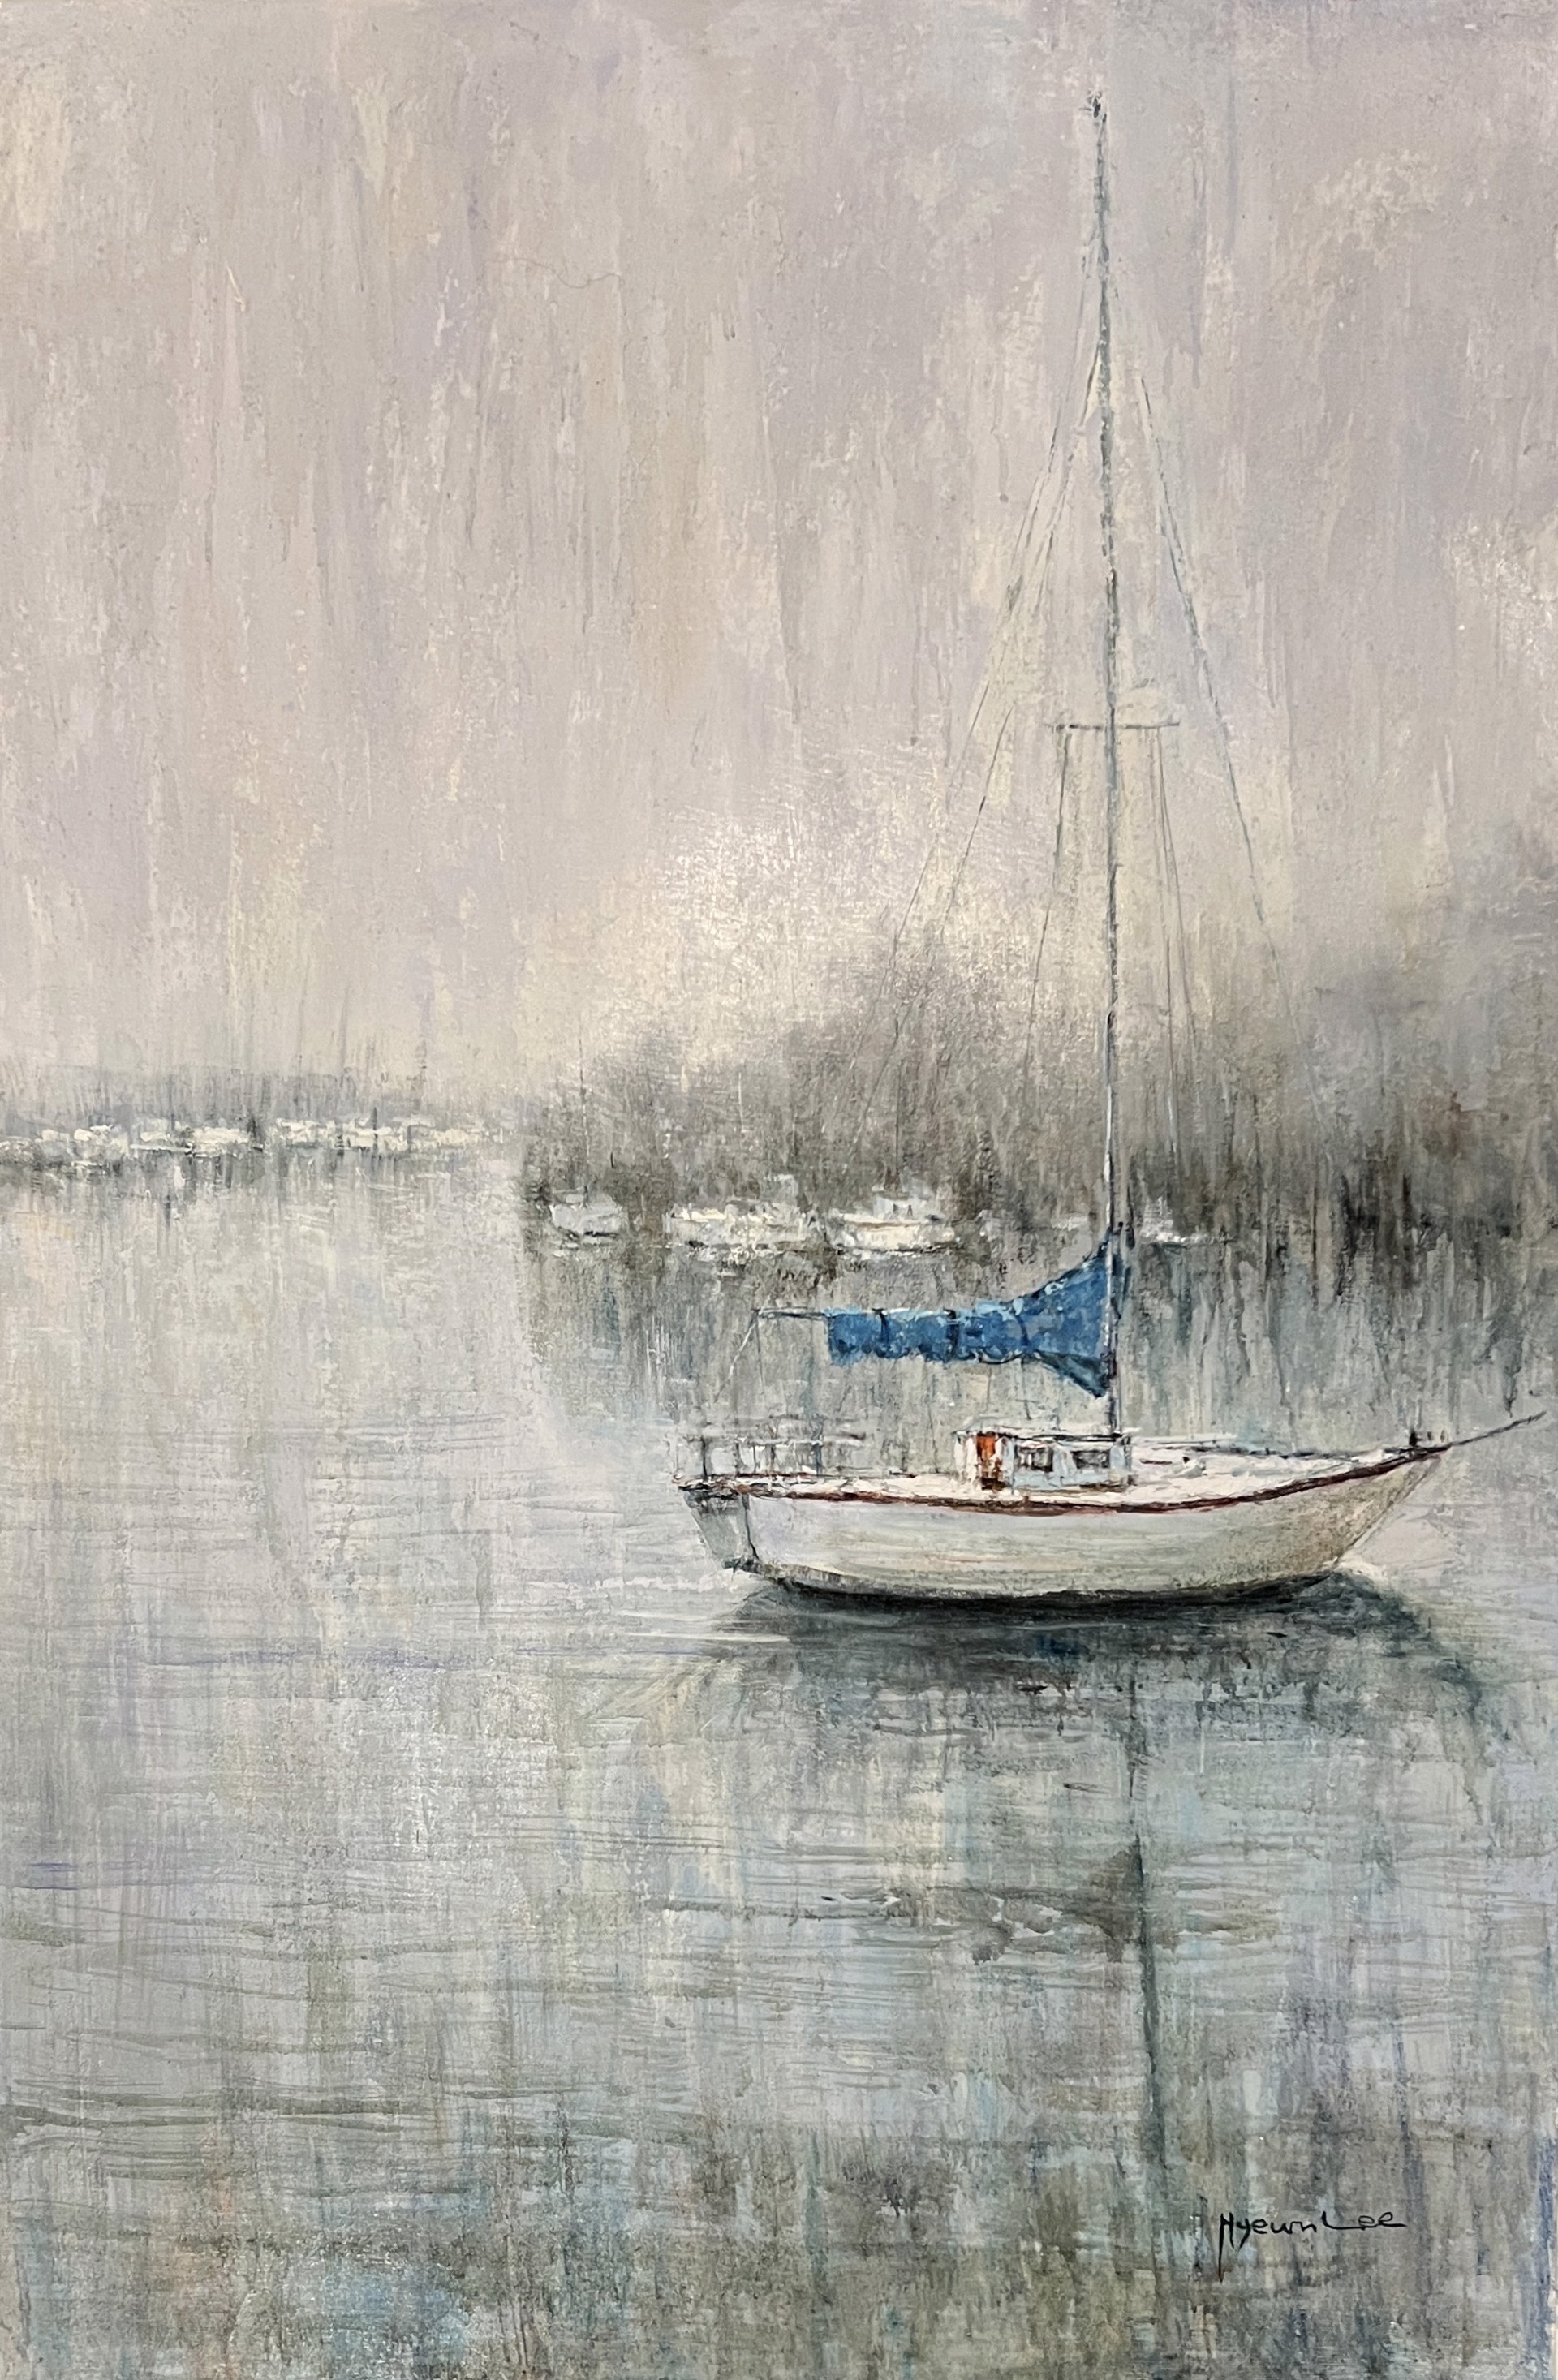 SAILBOAT ON STILL WATERWAY by H LEE